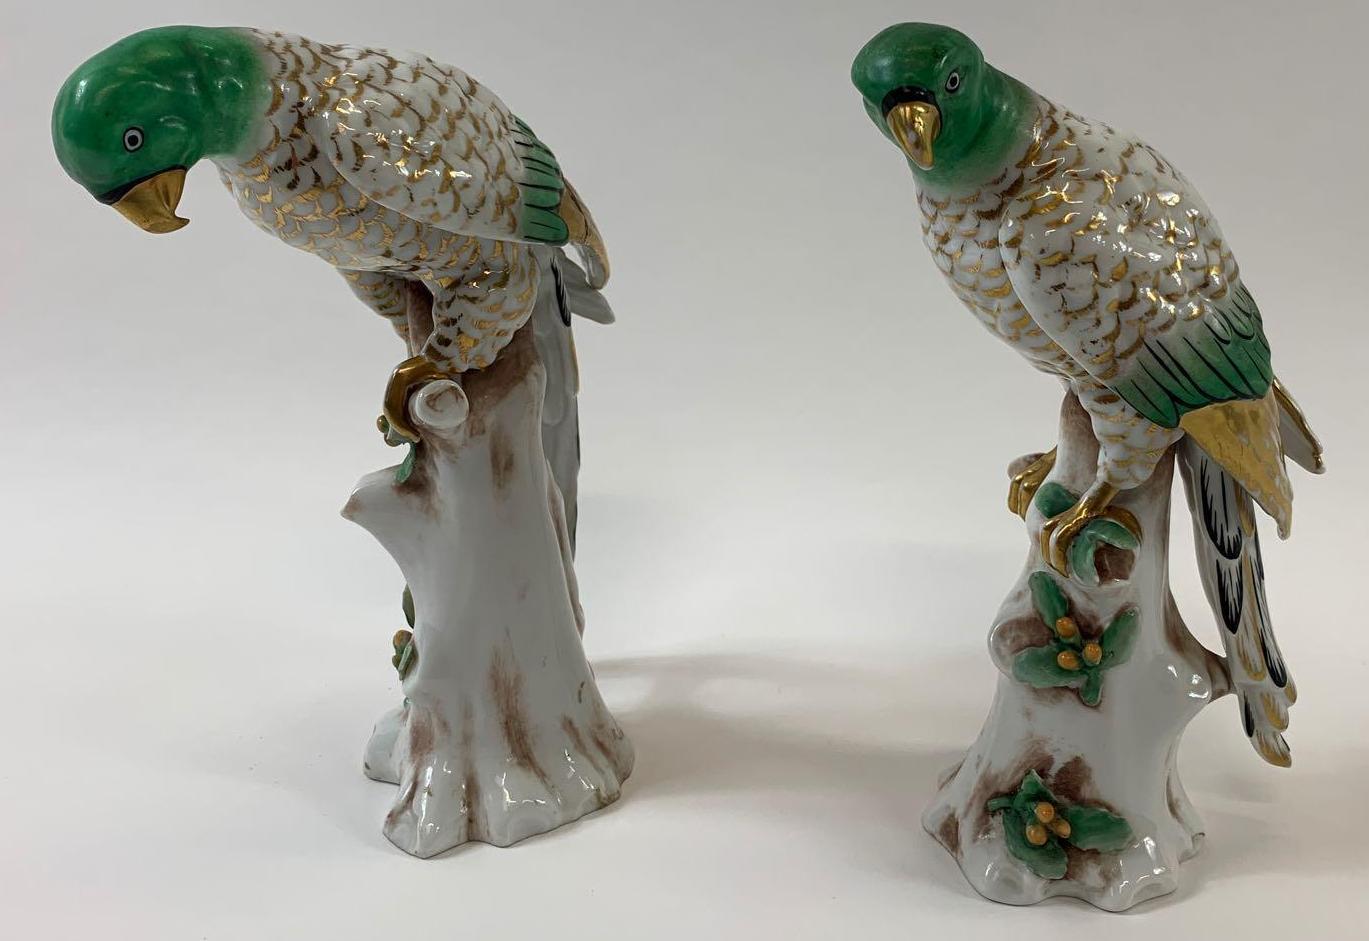 A pair of 19th century ceramic figures of birds, each painted with gilded and green highlights